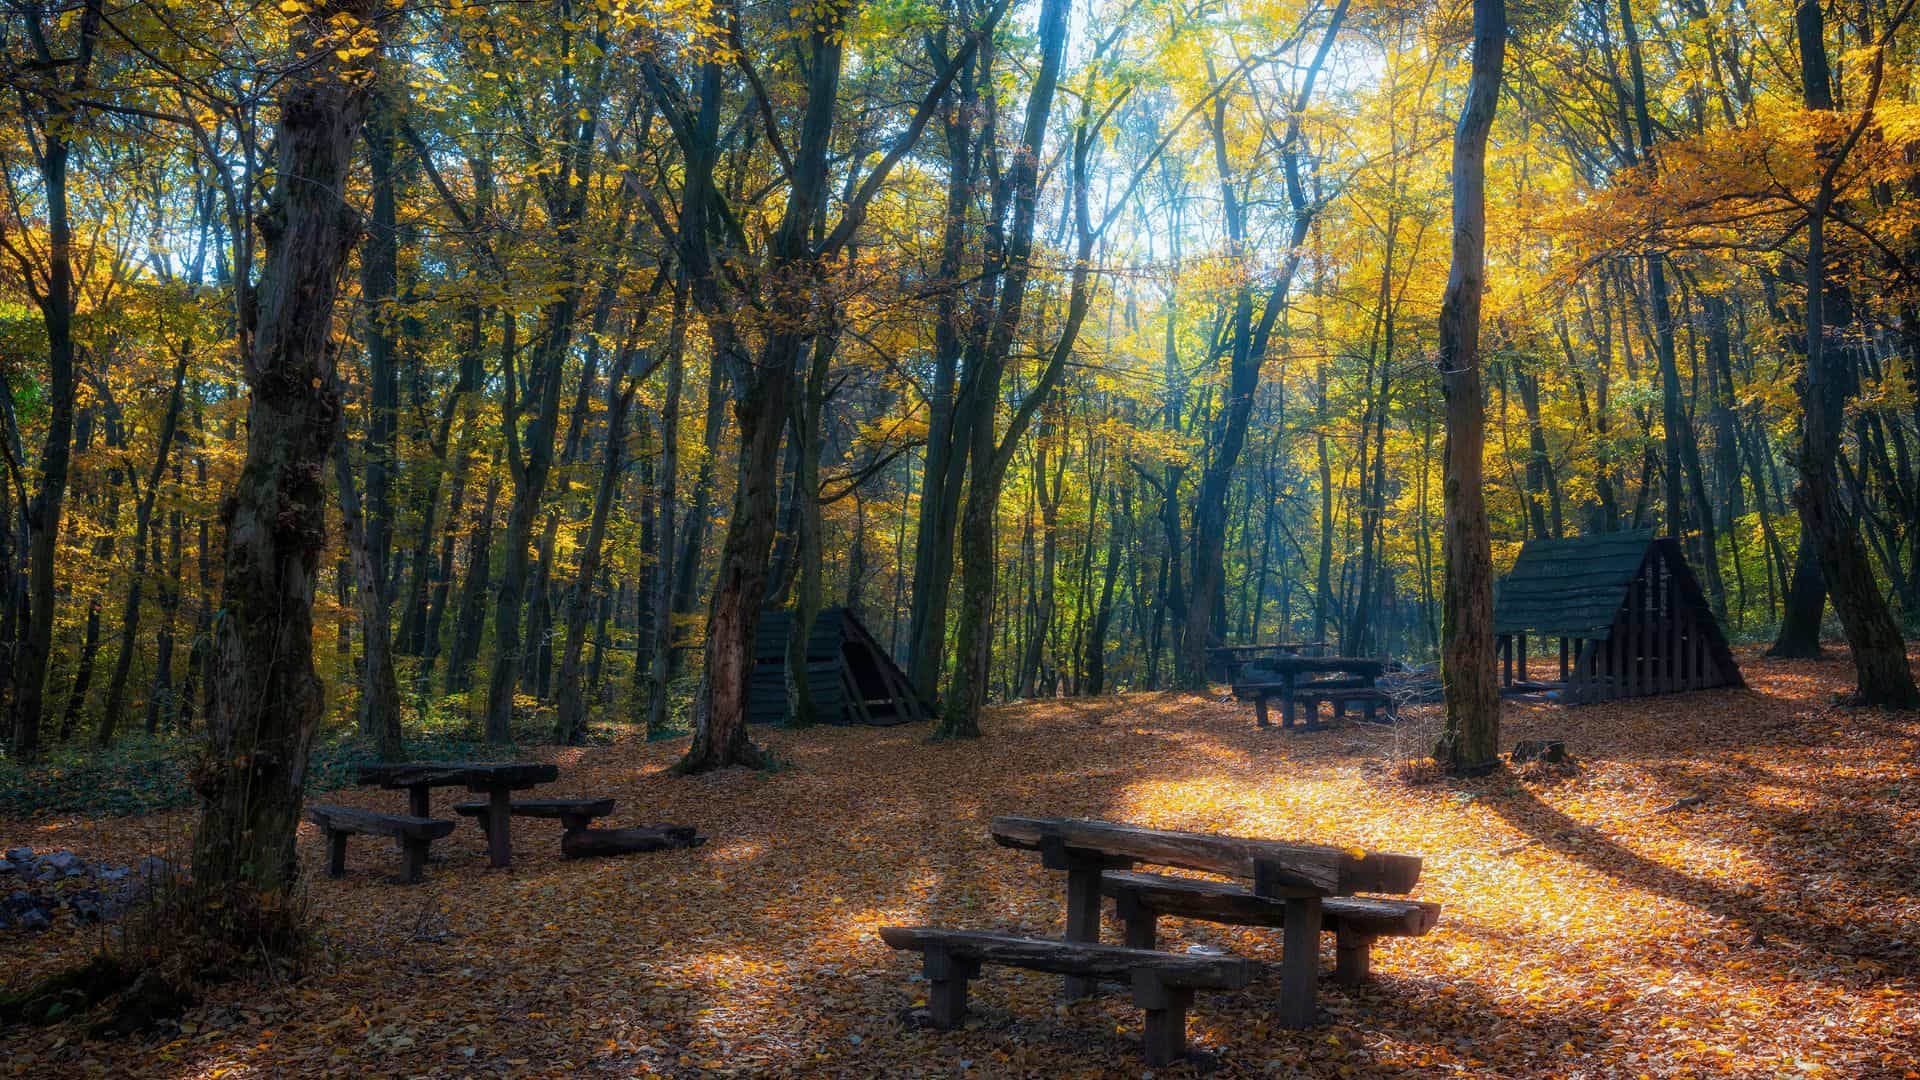 A group of picnic tables in a wooded area.